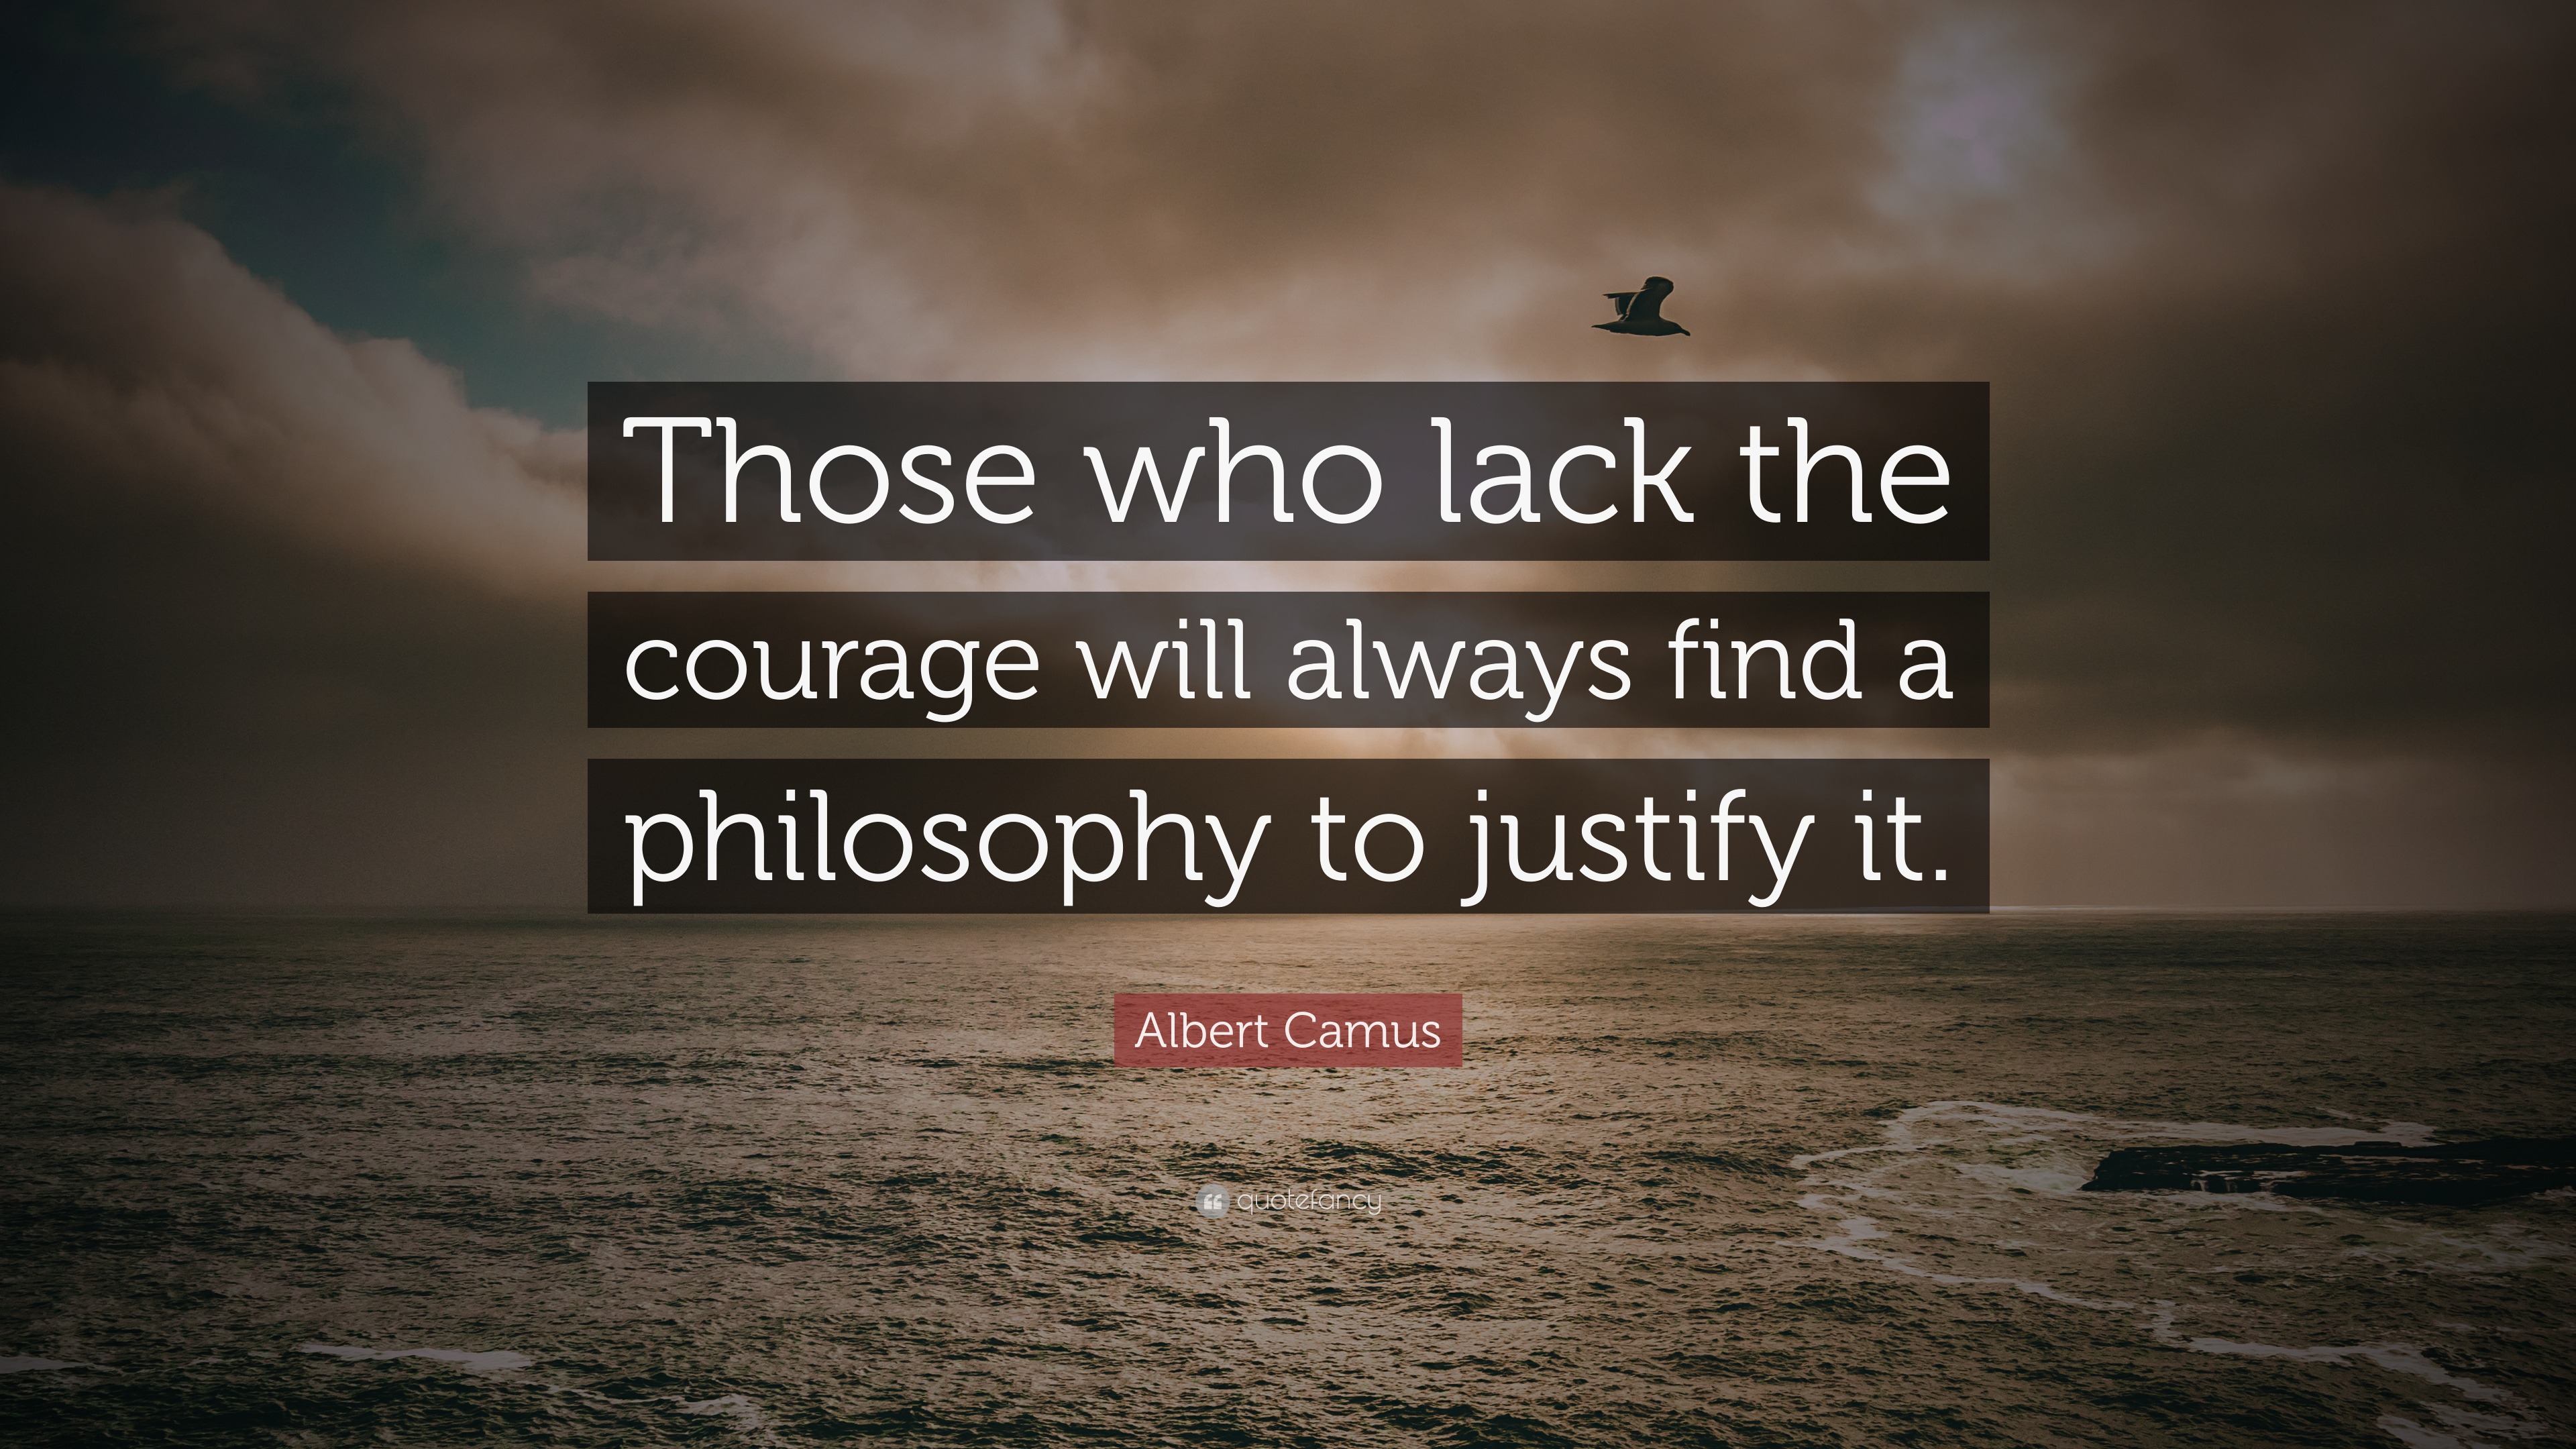 Albert Camus Quote: “Those who lack the courage will always find a ...